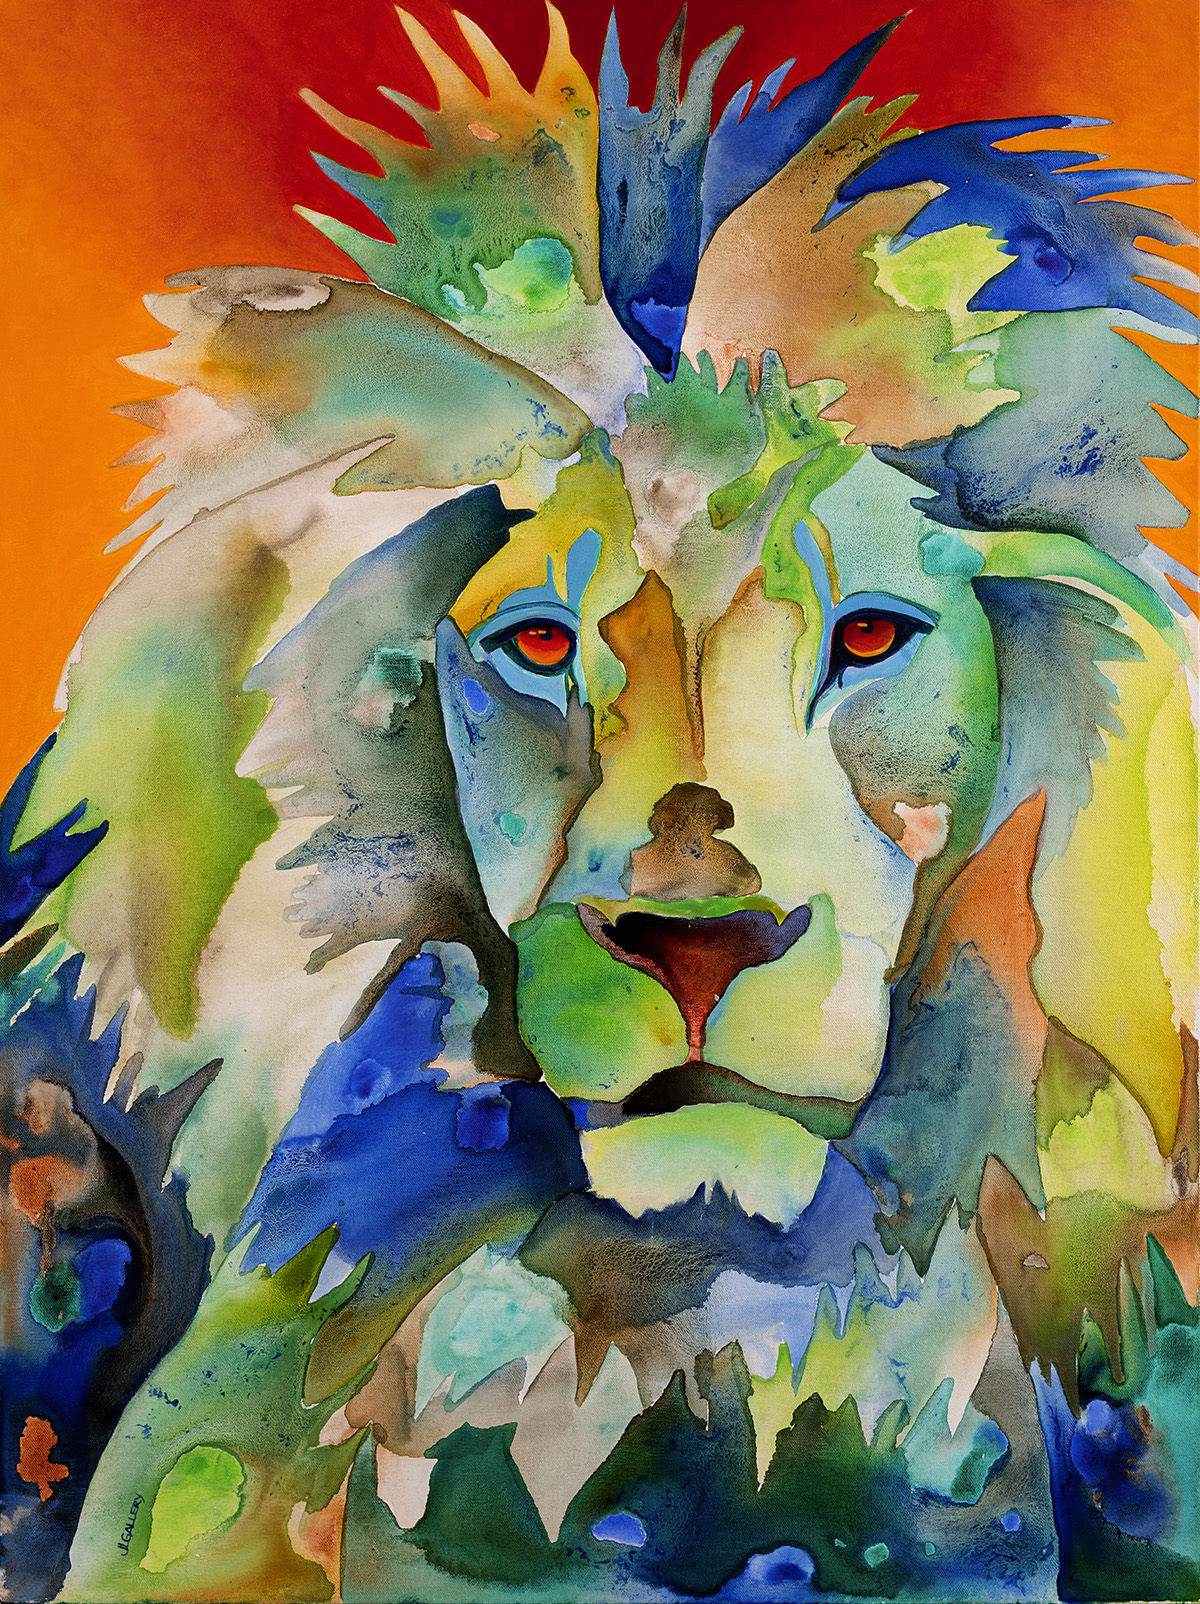 James the lion painting. Mainly green with a warm backgound.